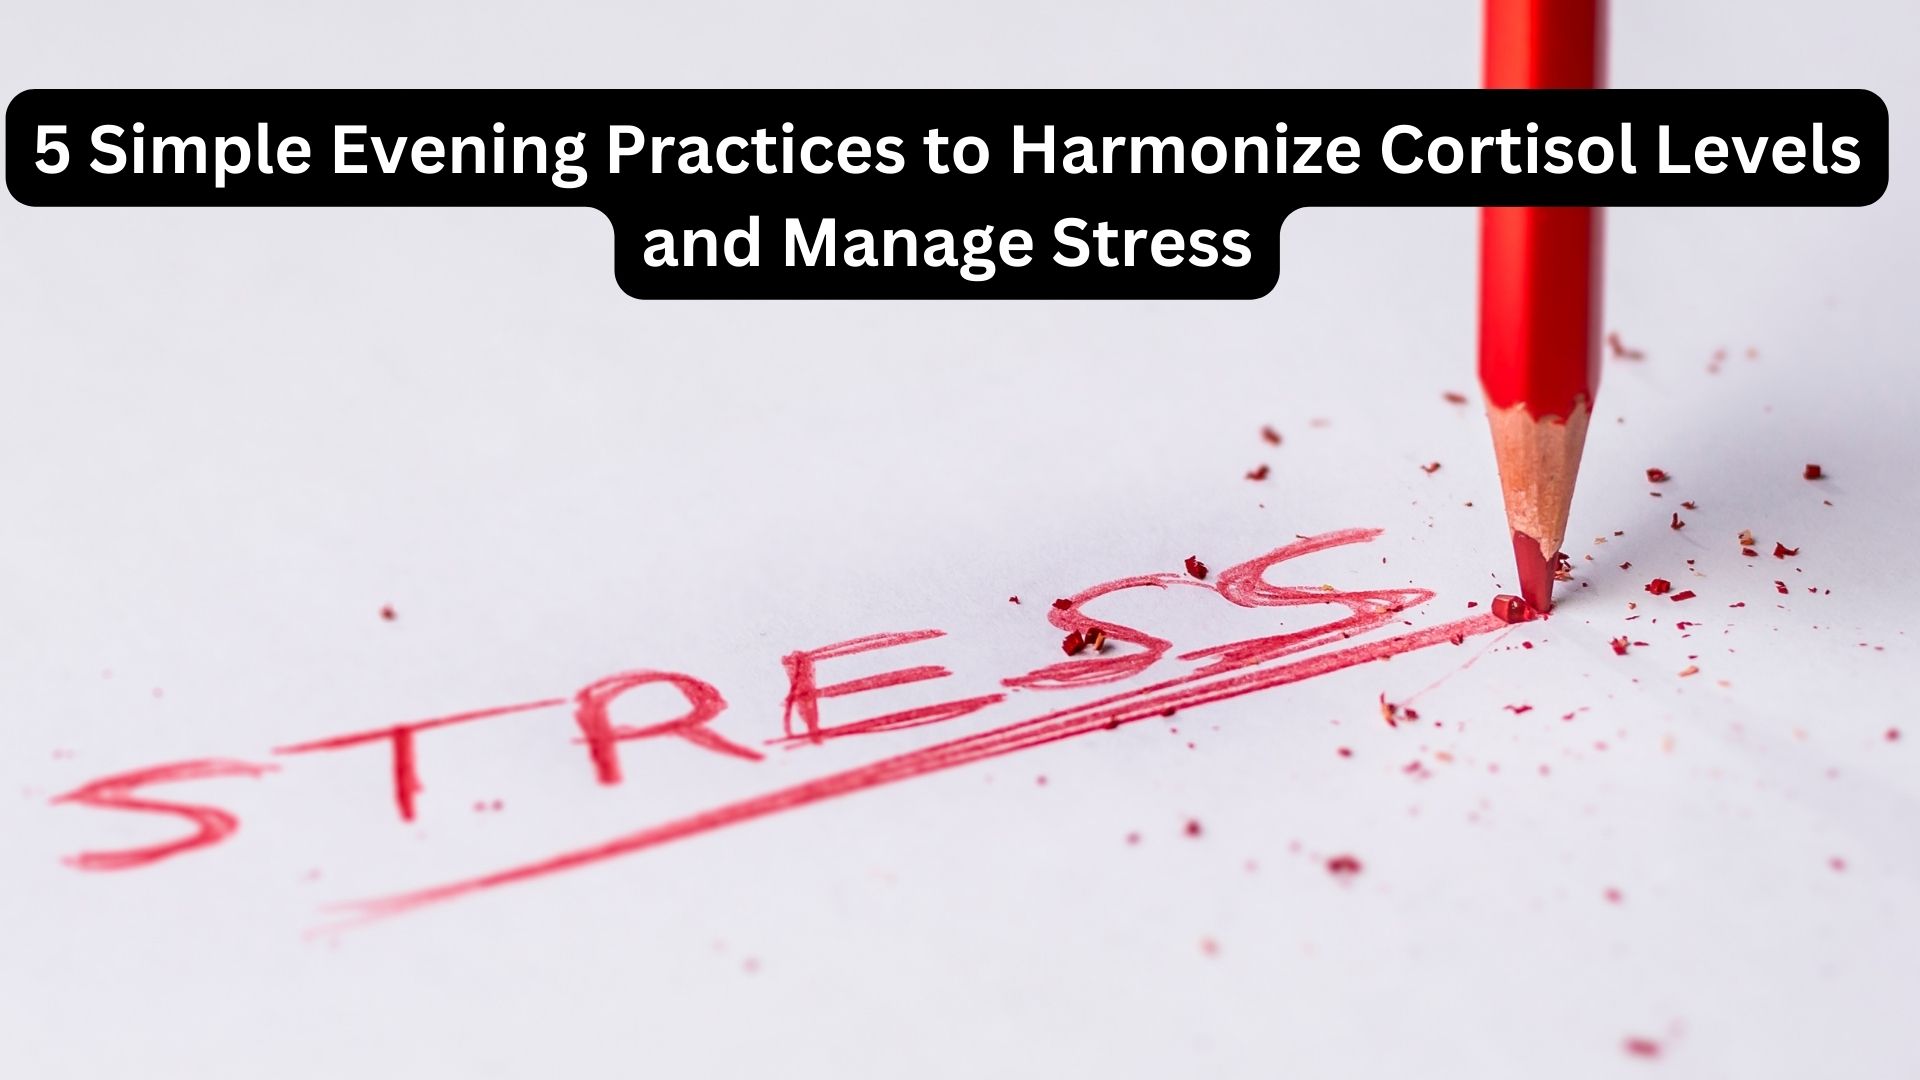 5 Simple Evening Practices to Harmonize Cortisol Levels and Manage Stress